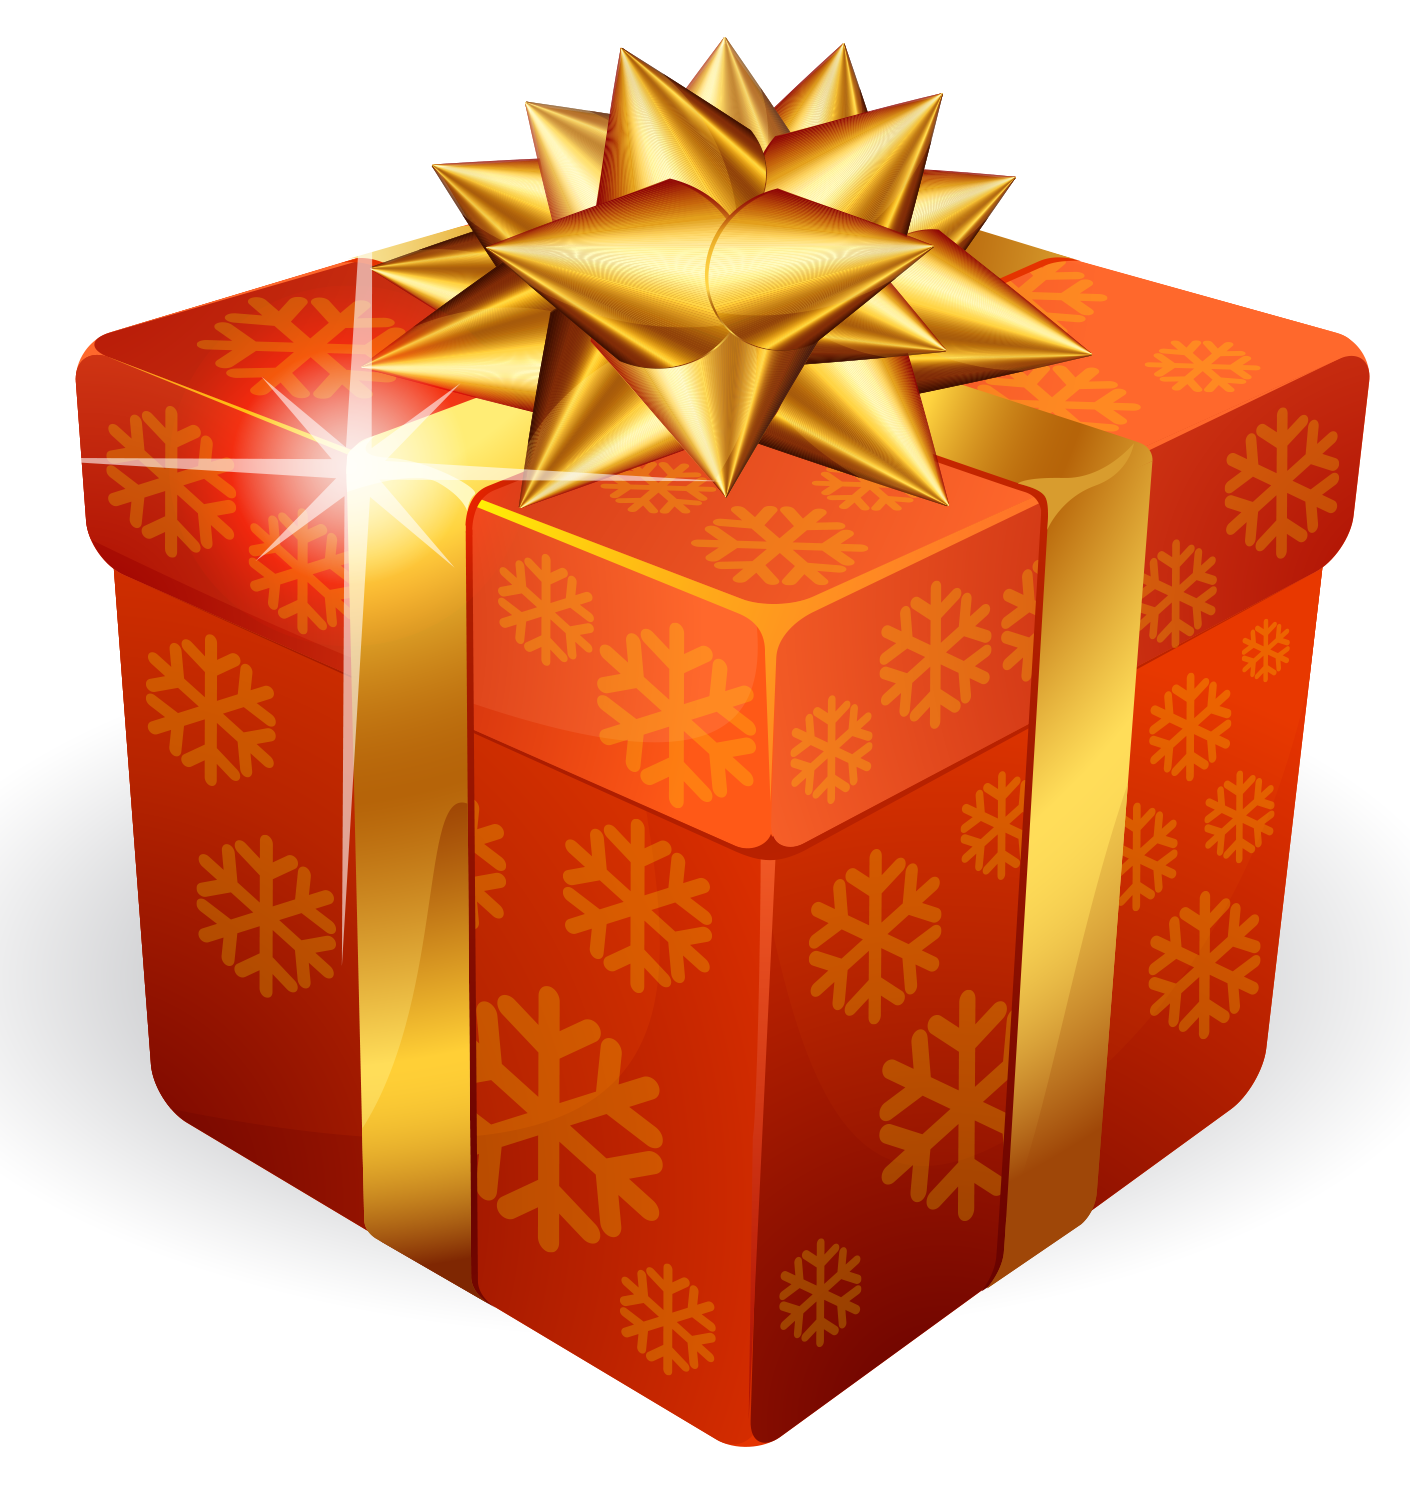 Download Gold Gift Box PNG For Designing Projects.